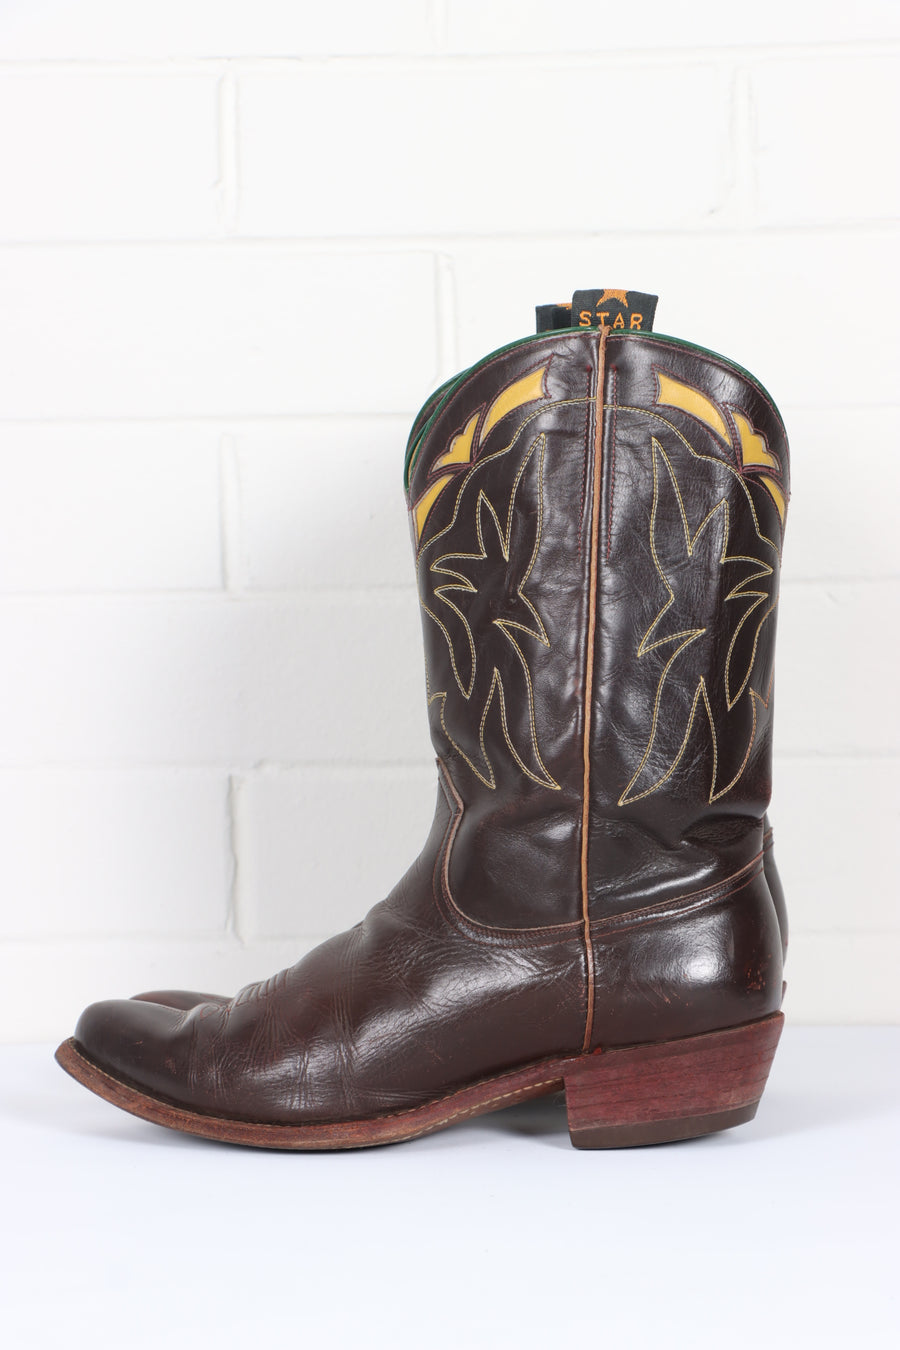 Vintage 'Lone Star' Brown Mahogany Leather Cowboy Boots (9)